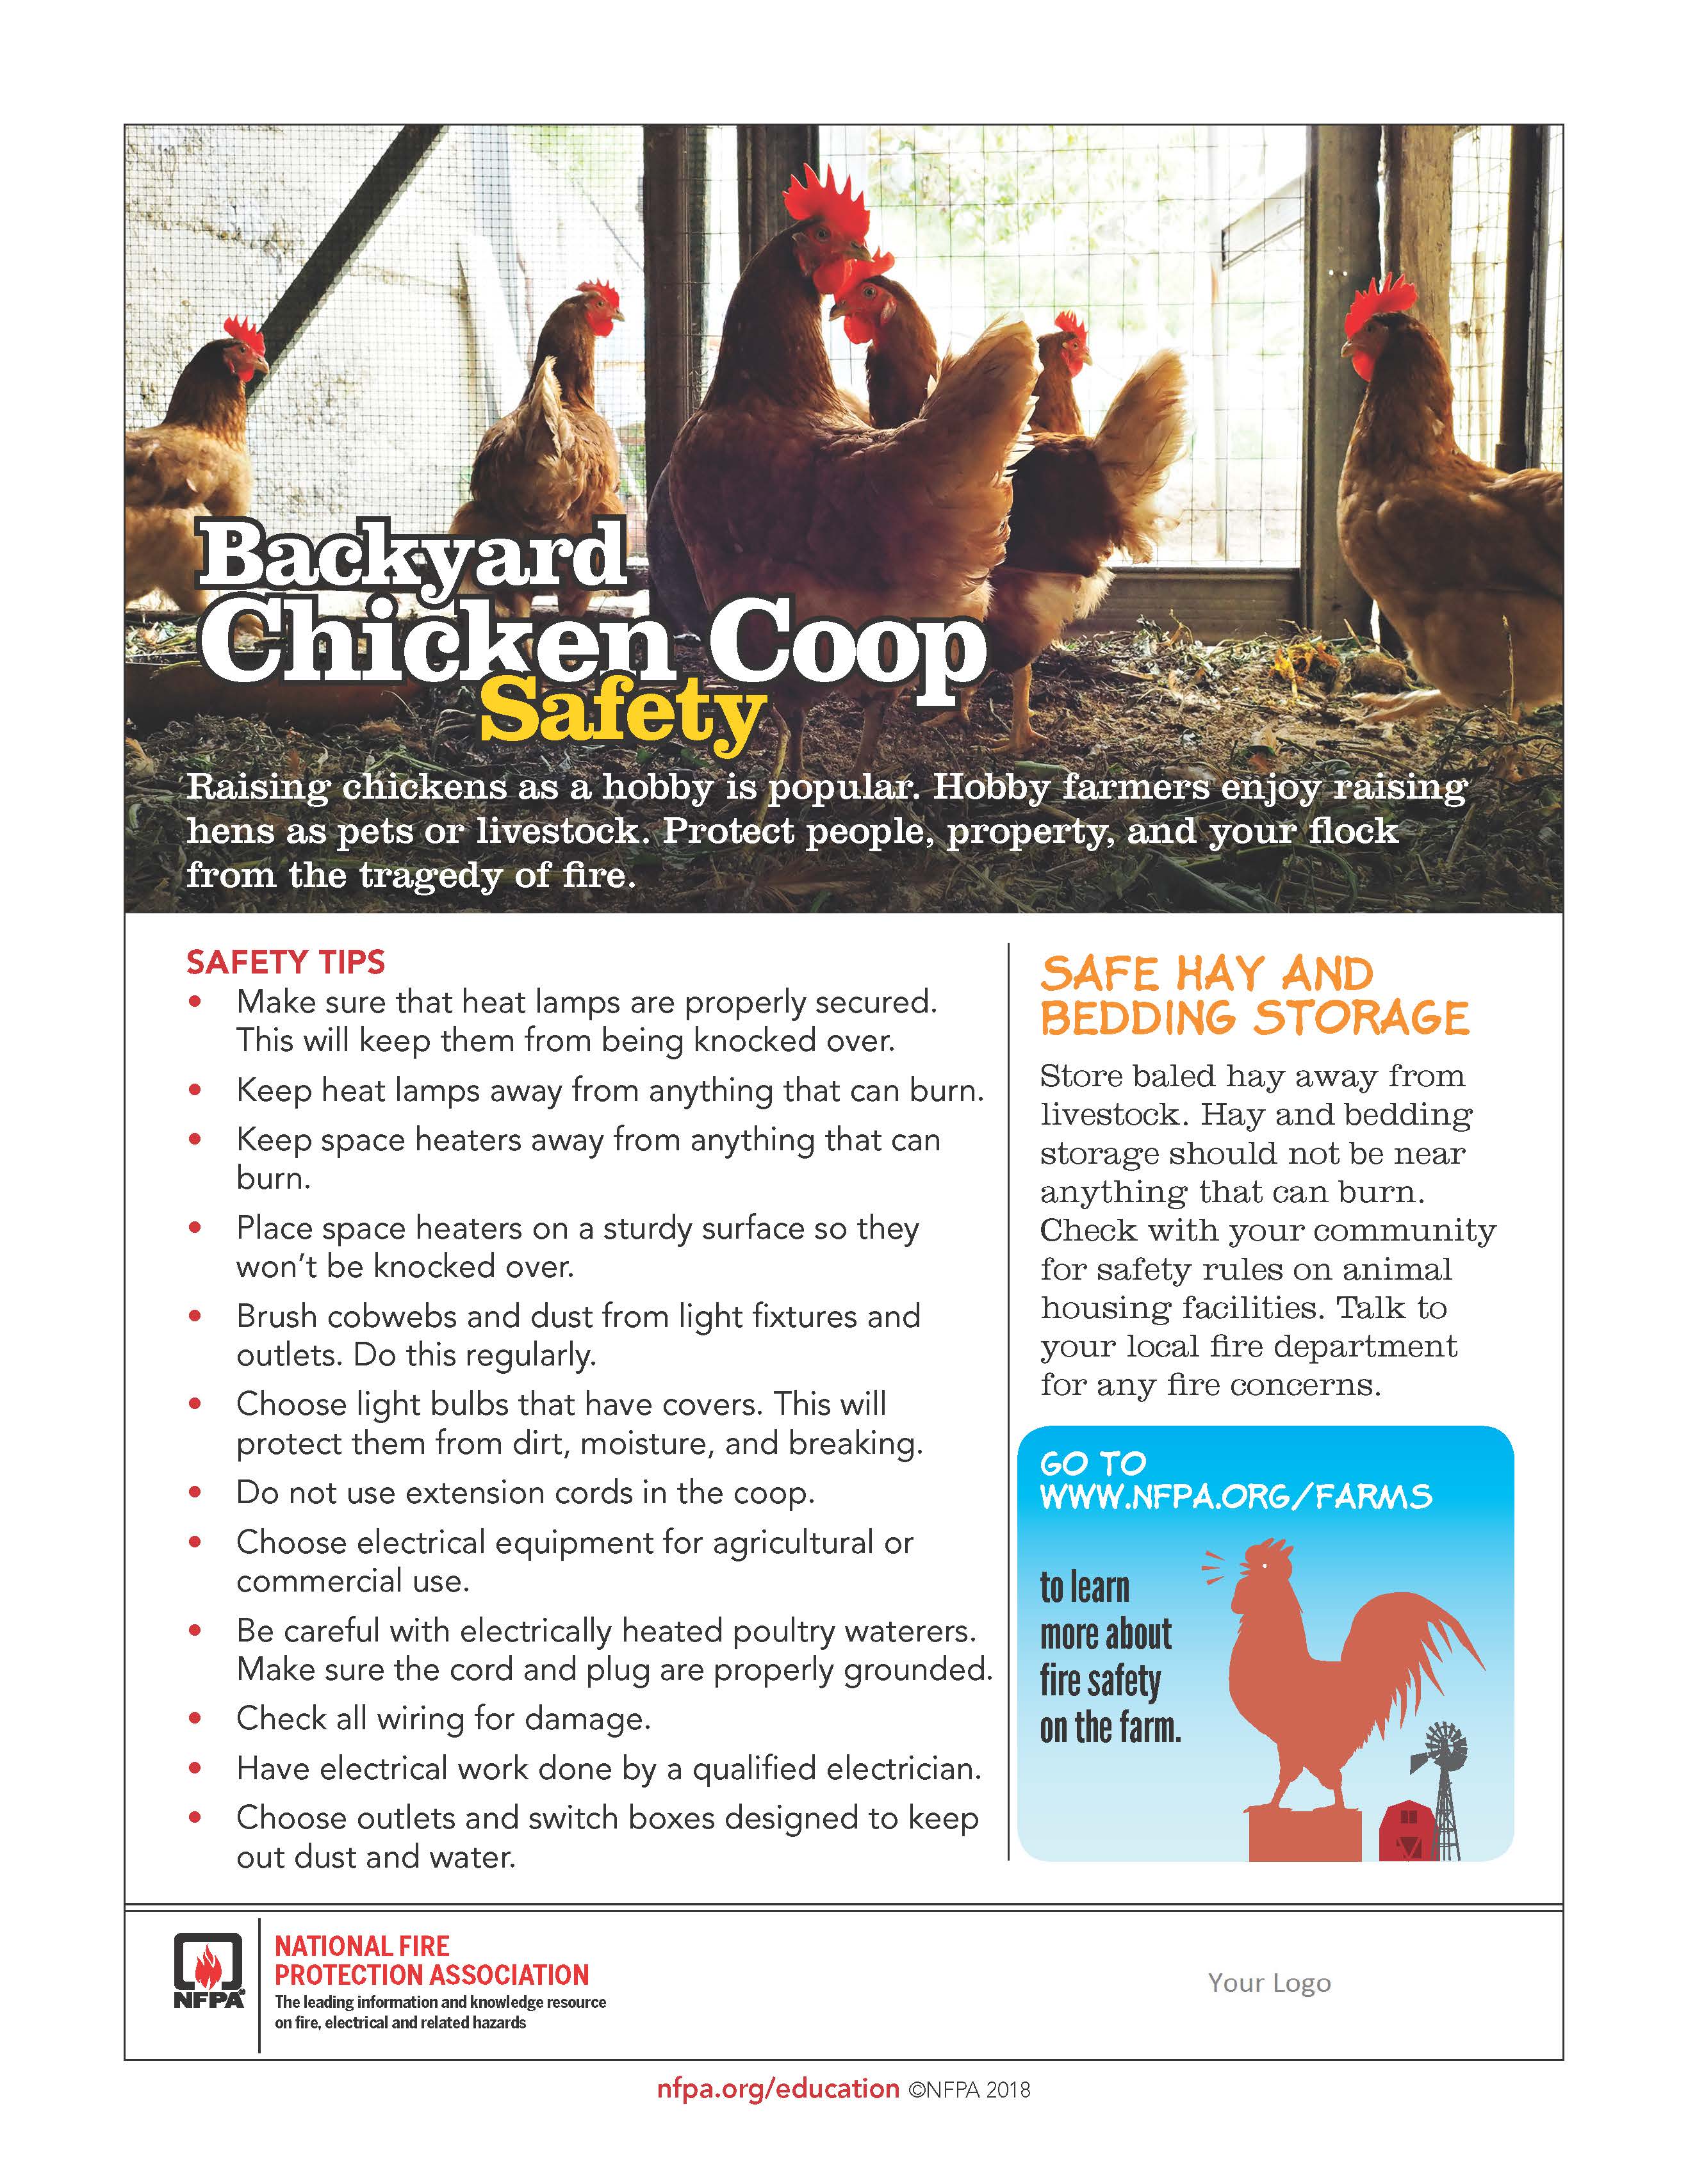 Chicken Coop Safety Sheet with Tips 